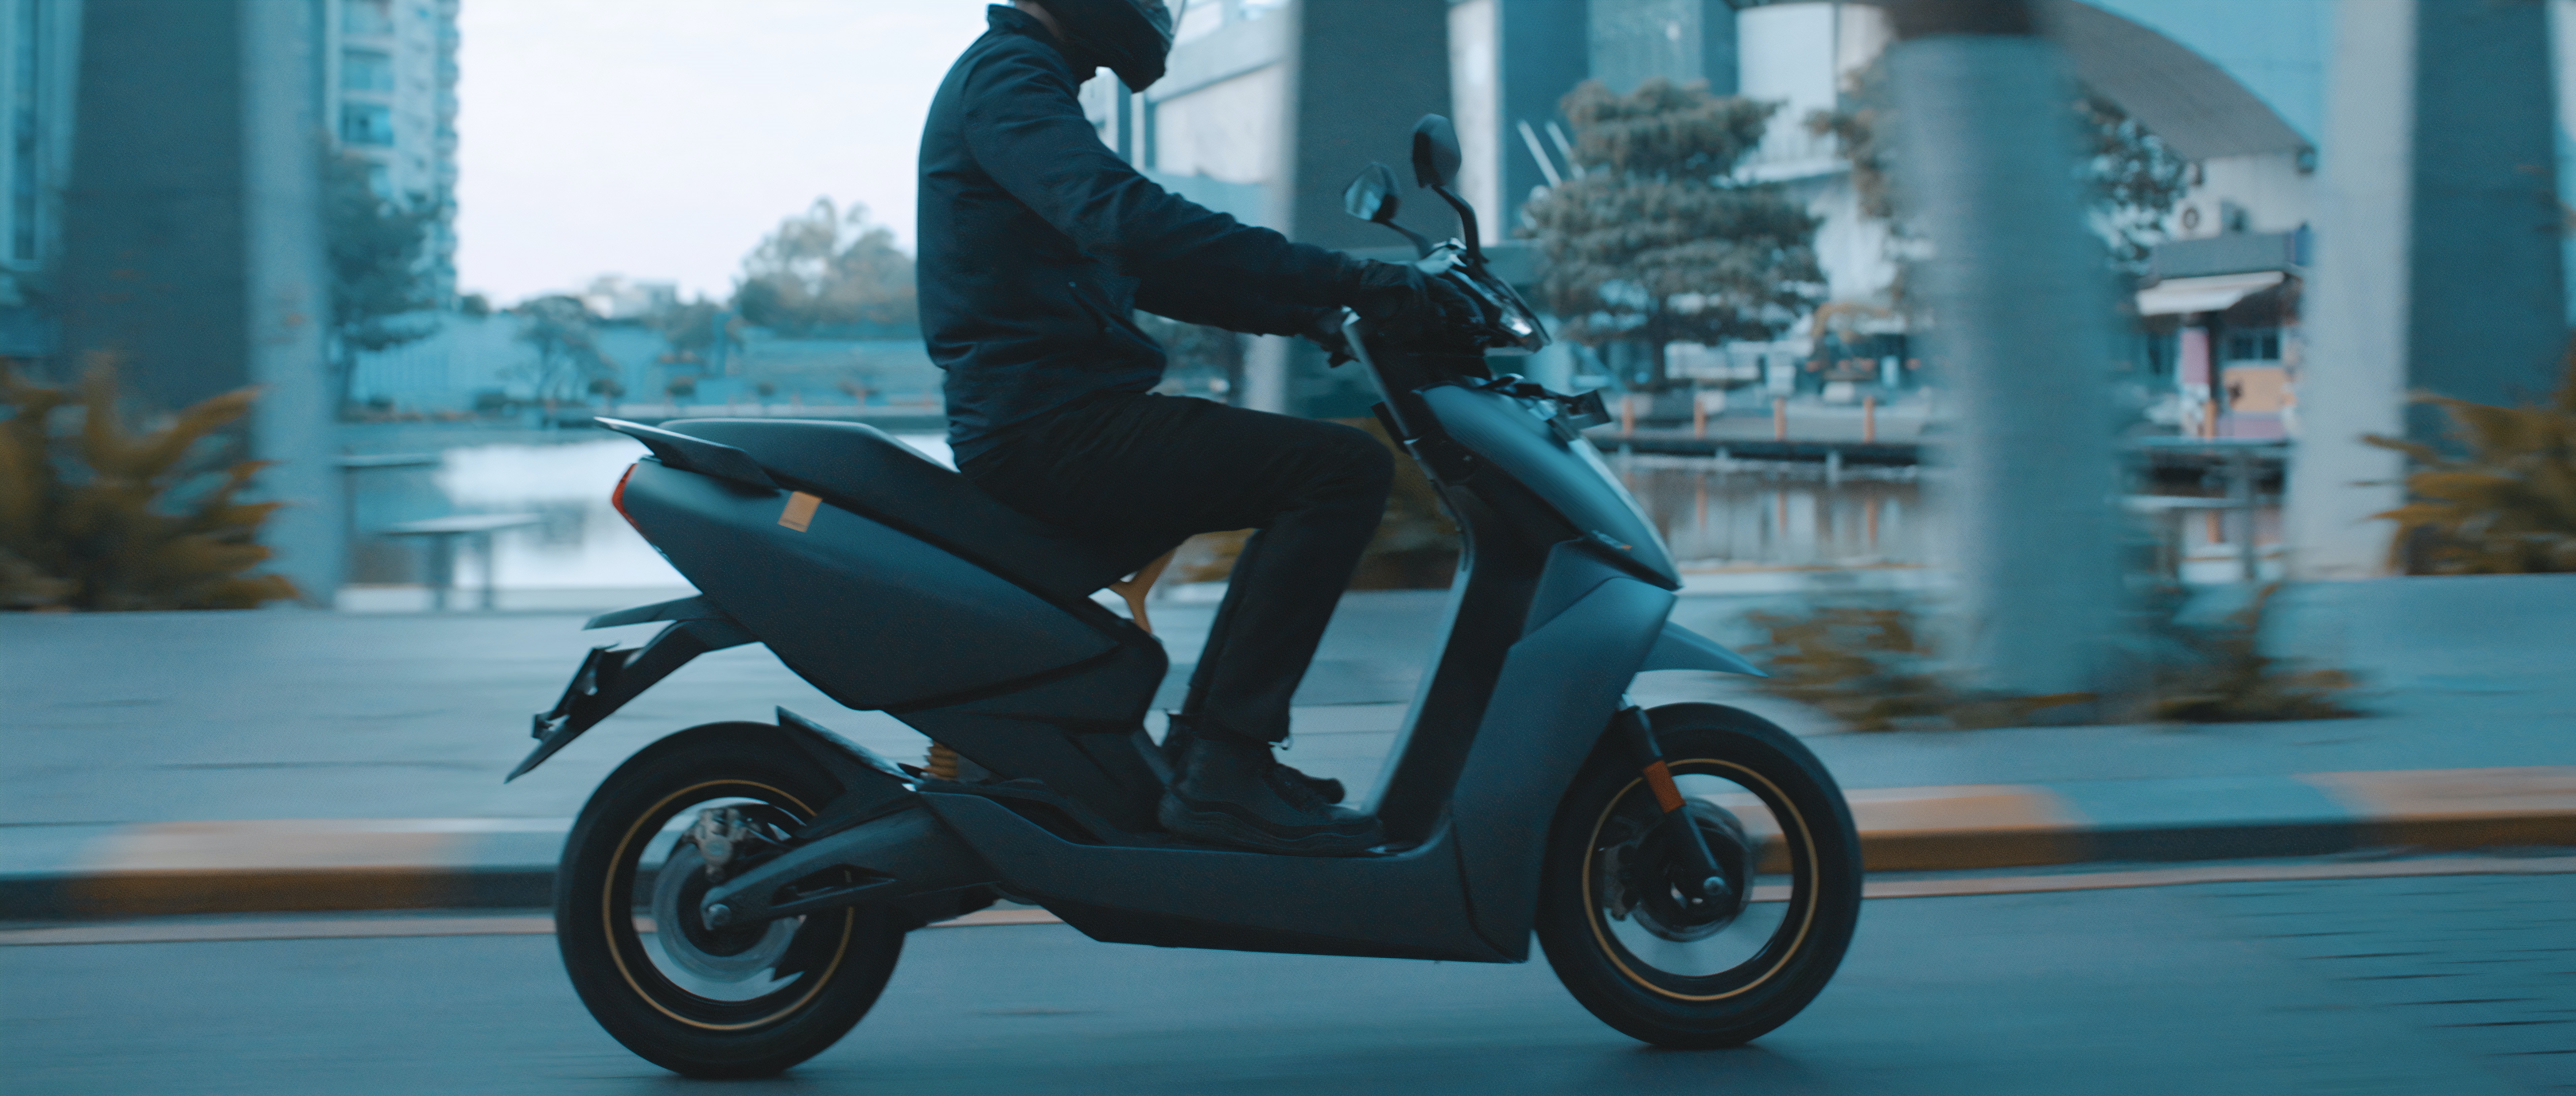 do electric motorcycles require a license